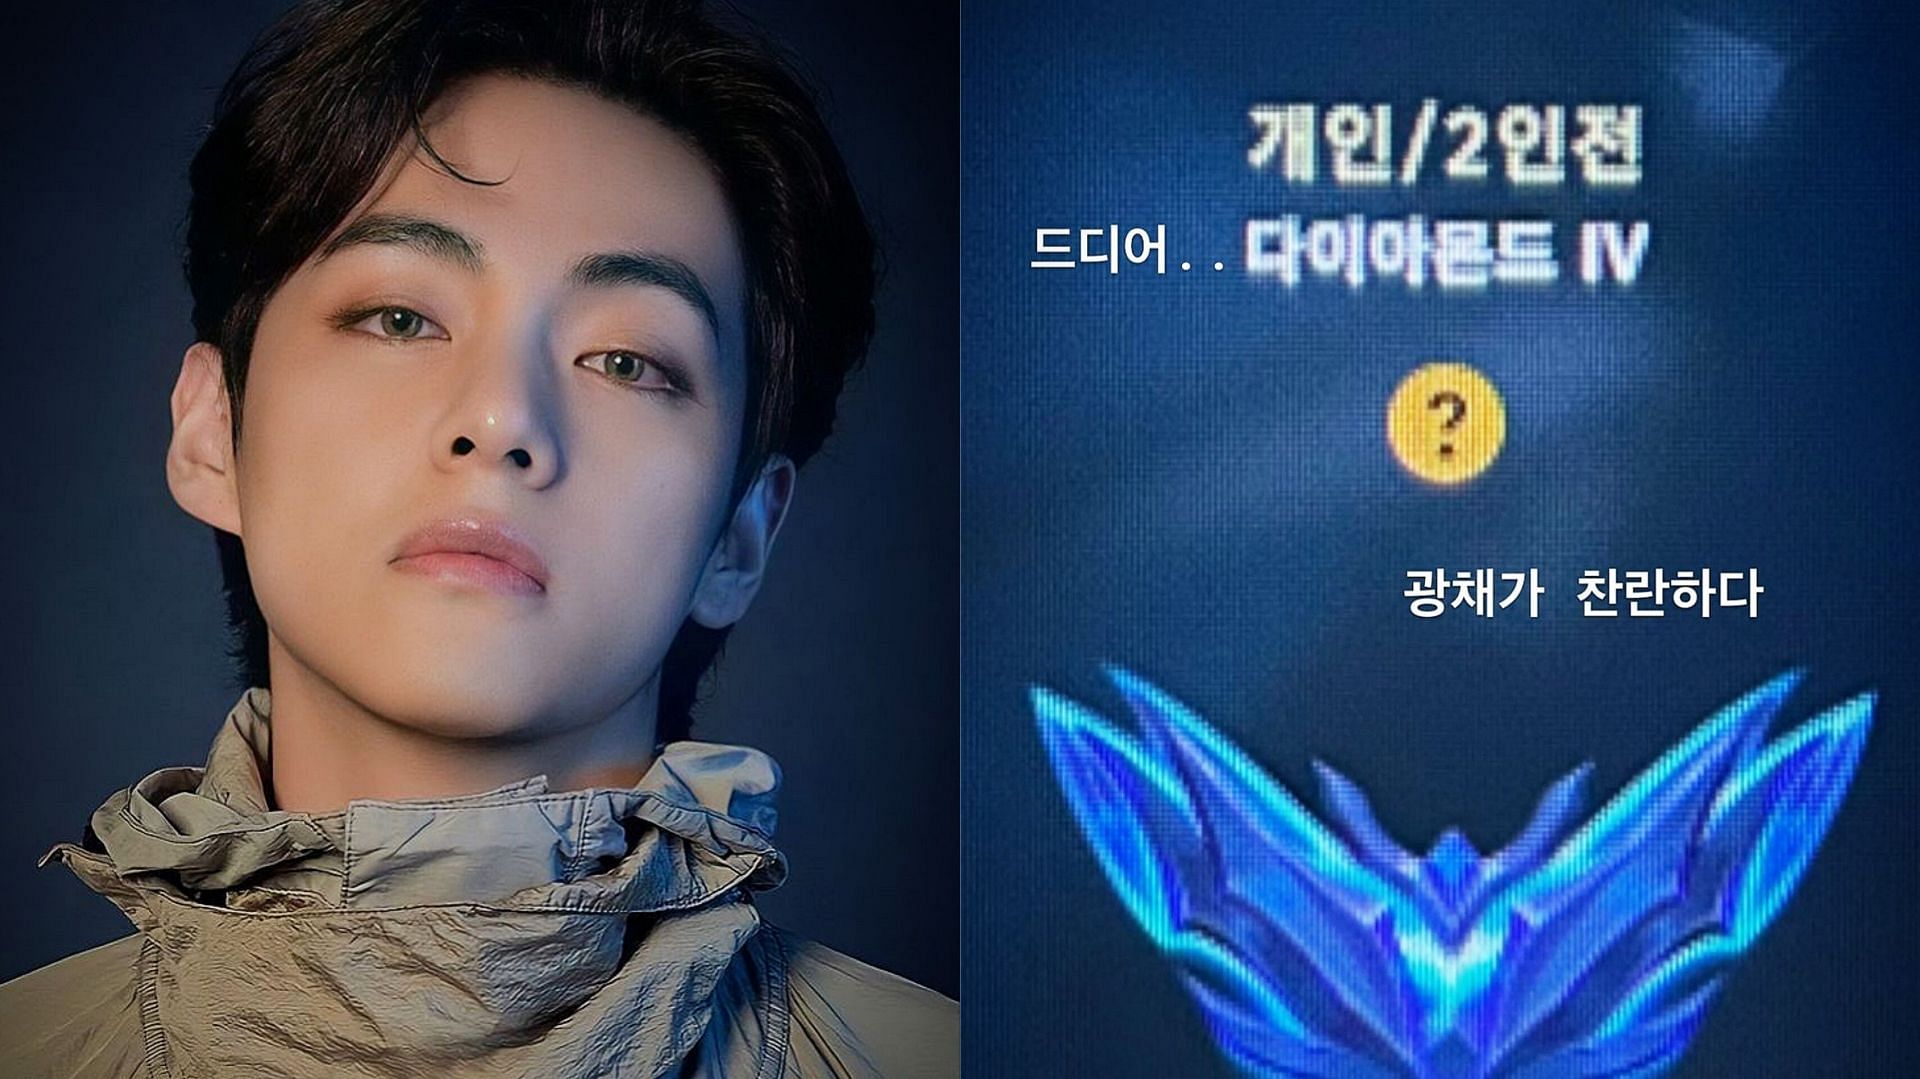 Gamer taehyung is striving”: Fans in a frenzy as BTS' V